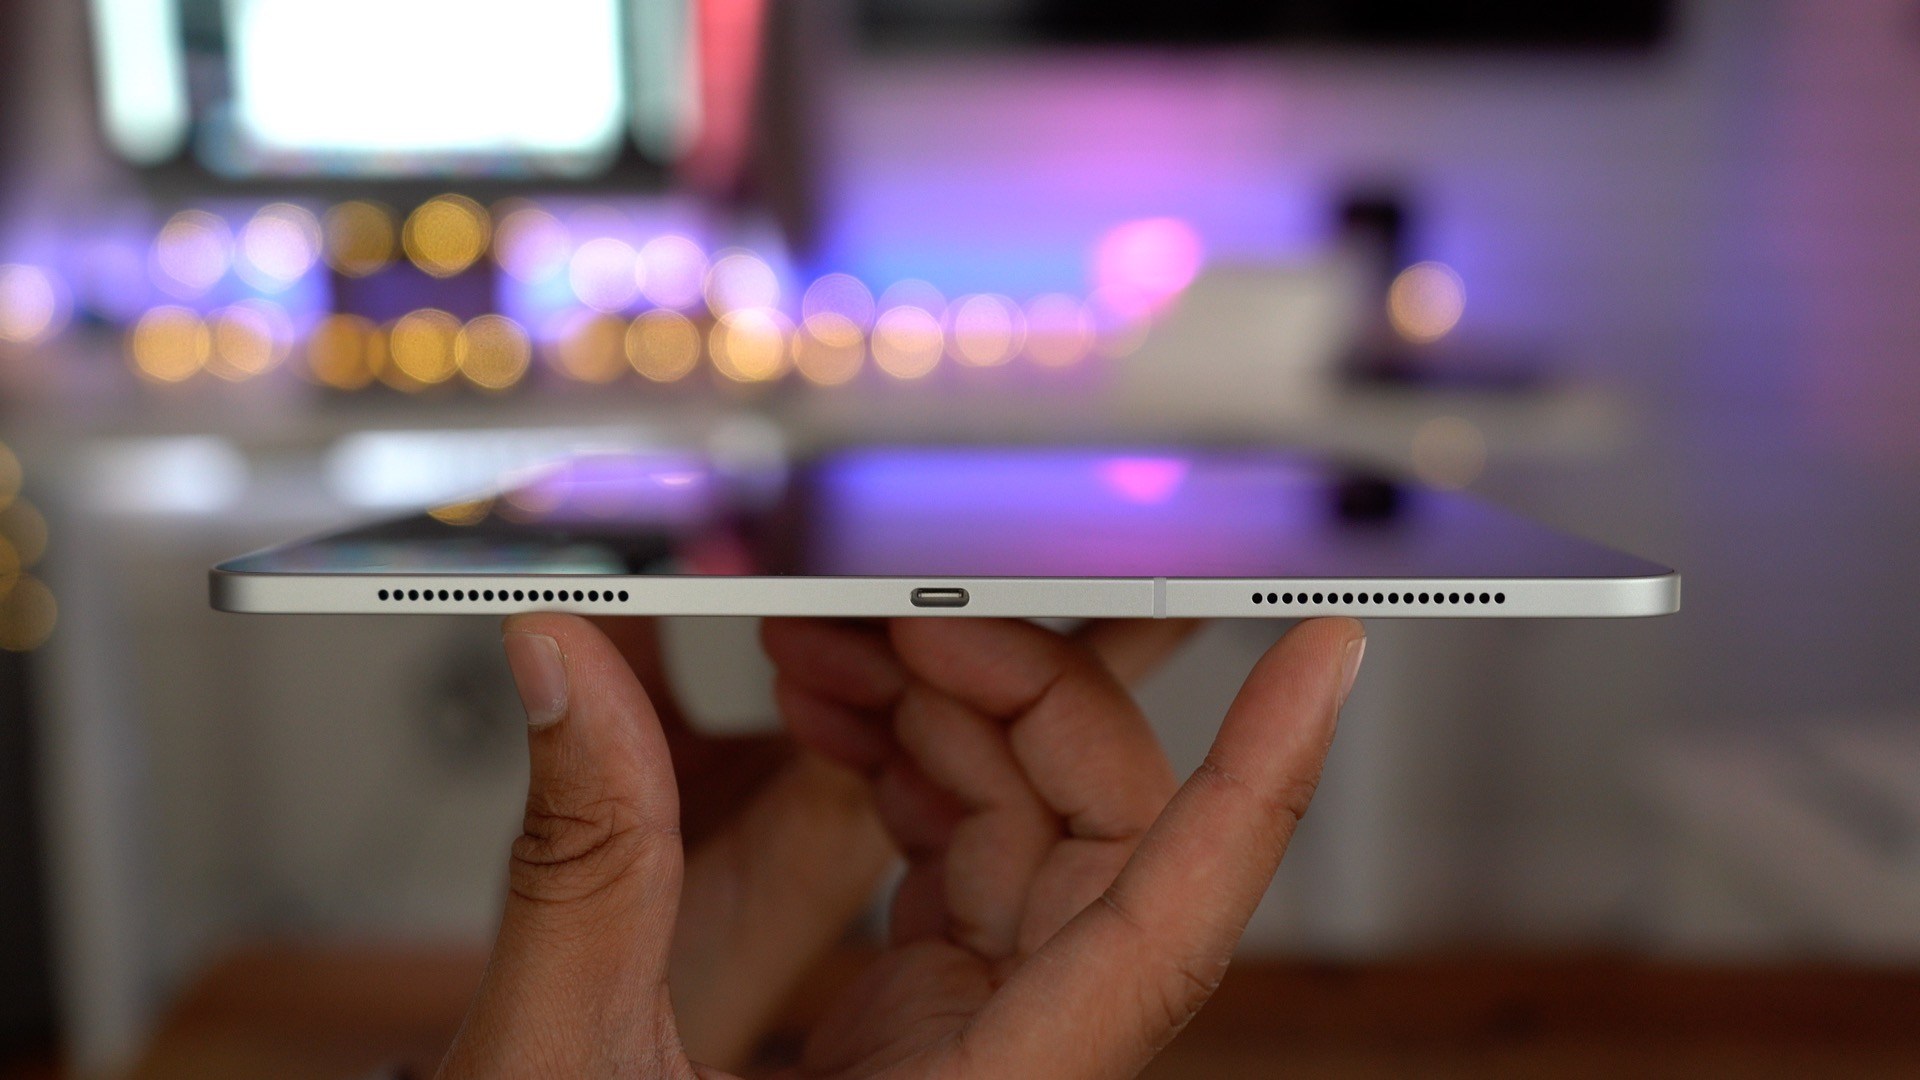 Apple denies its acknowledgement that iPad Pros are prone to bending, says they're perfect